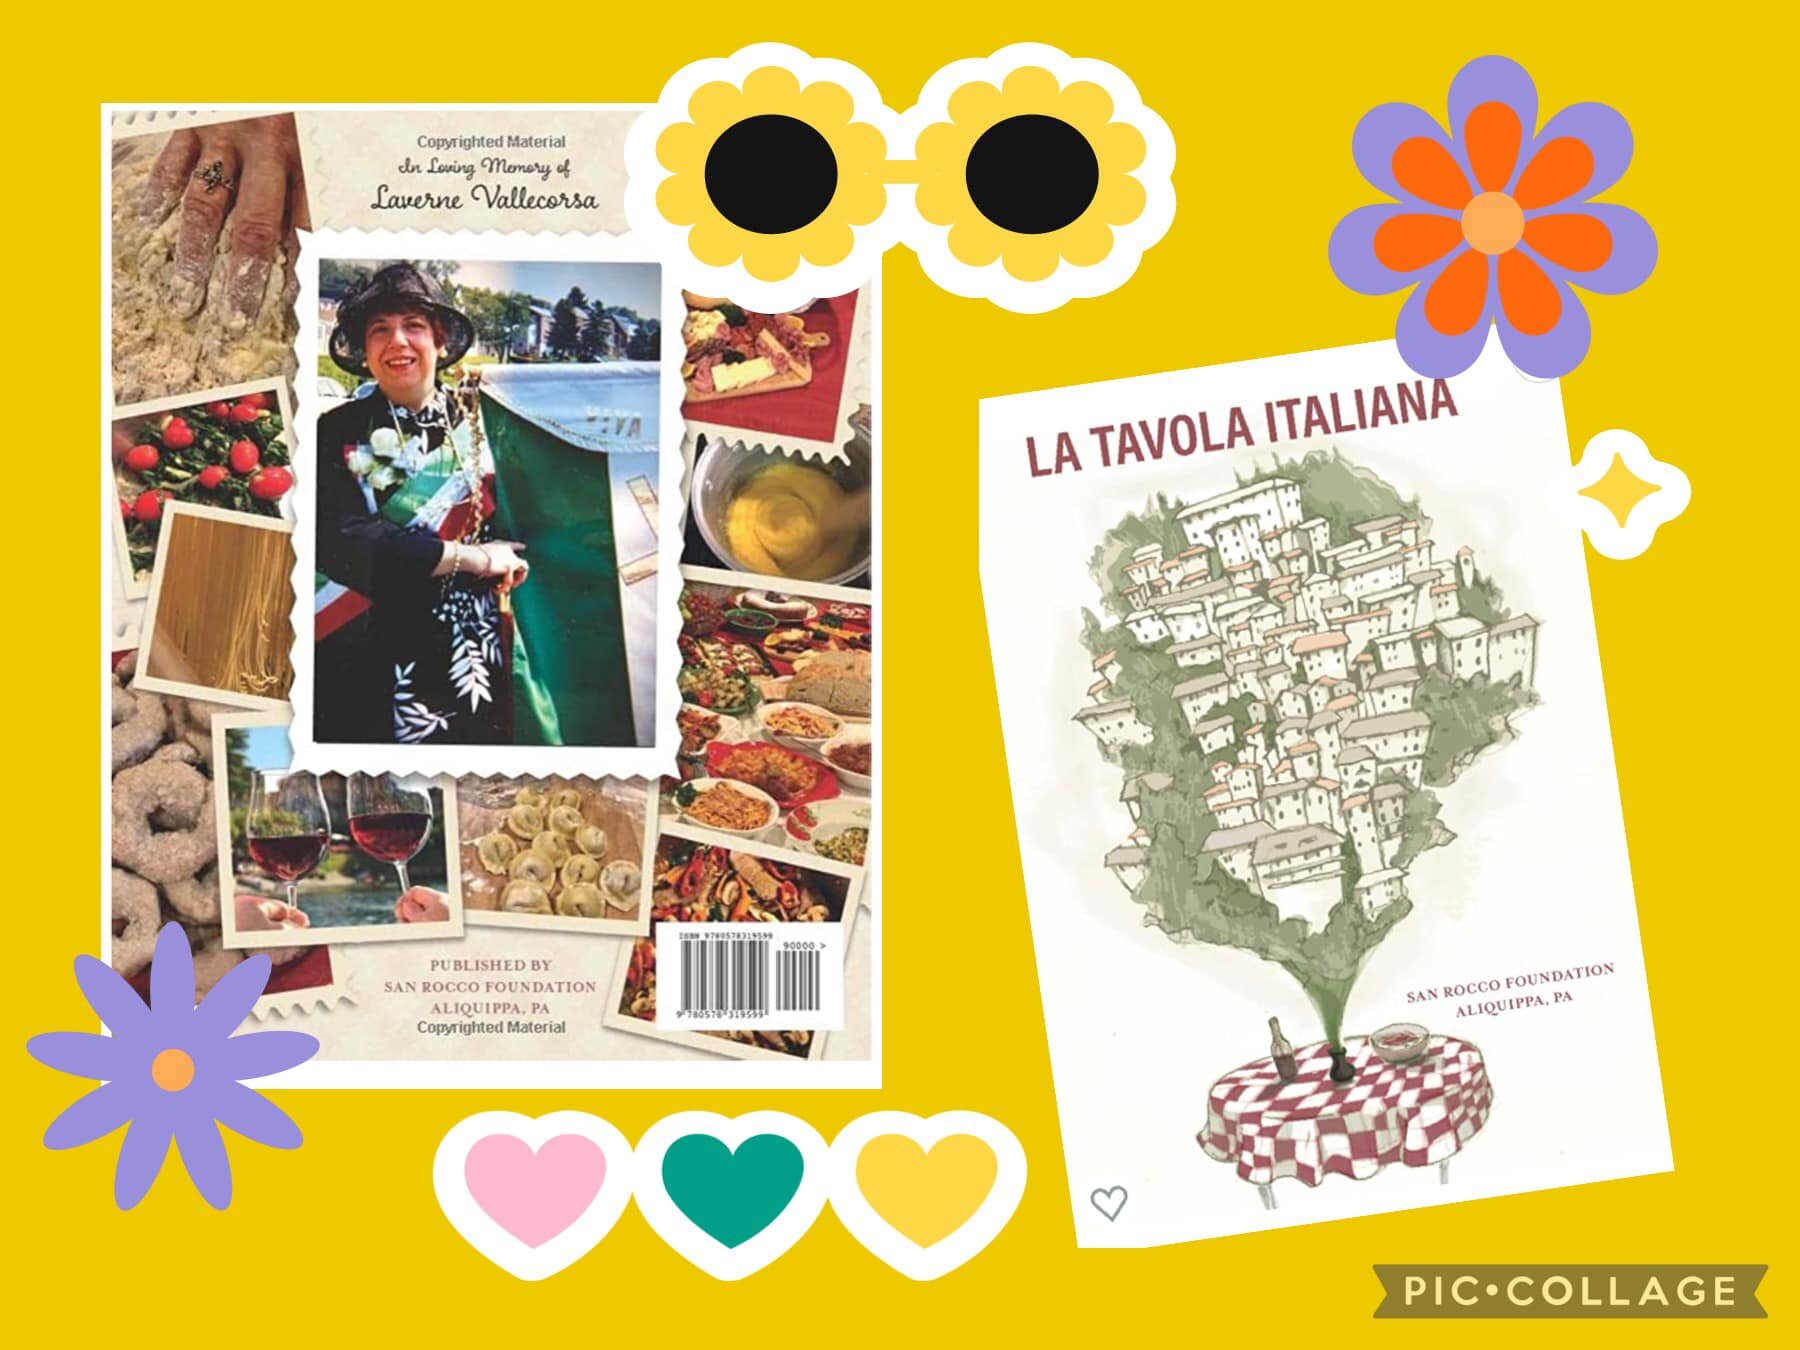 Looking for that last minute gift for mom?? You can send her a copy of the family favorites!!! Then cook for her!! 
La Tavola is available on Amazon. $25 

https://www.amazon.com/Tavola-Italiana-San-Rocco-Foundation/dp/0578319594

As well as at Cesin